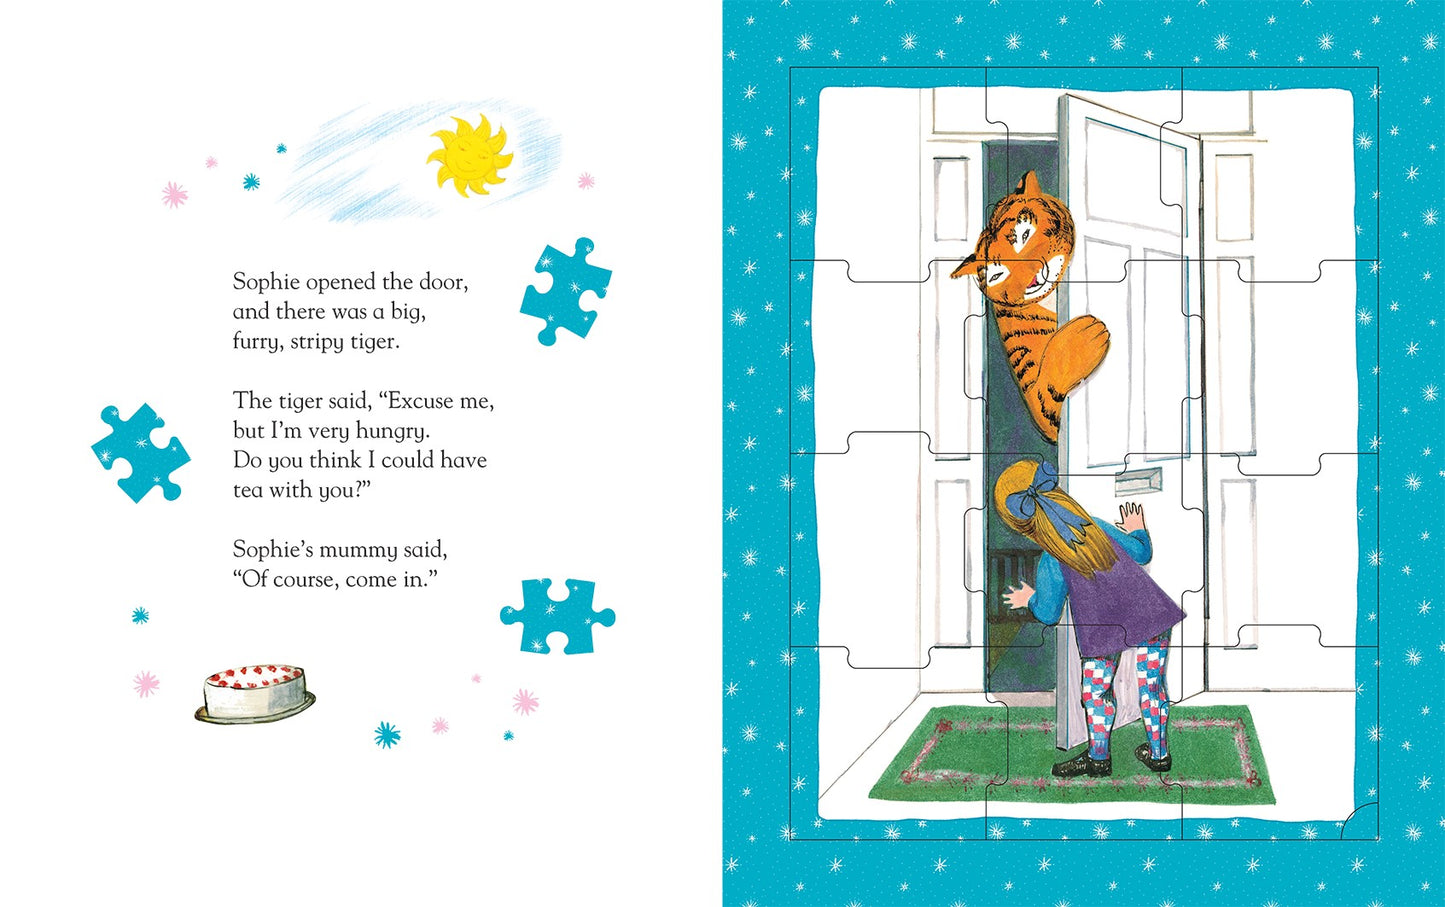 The Tiger Who Came to Tea Jigsaw Book